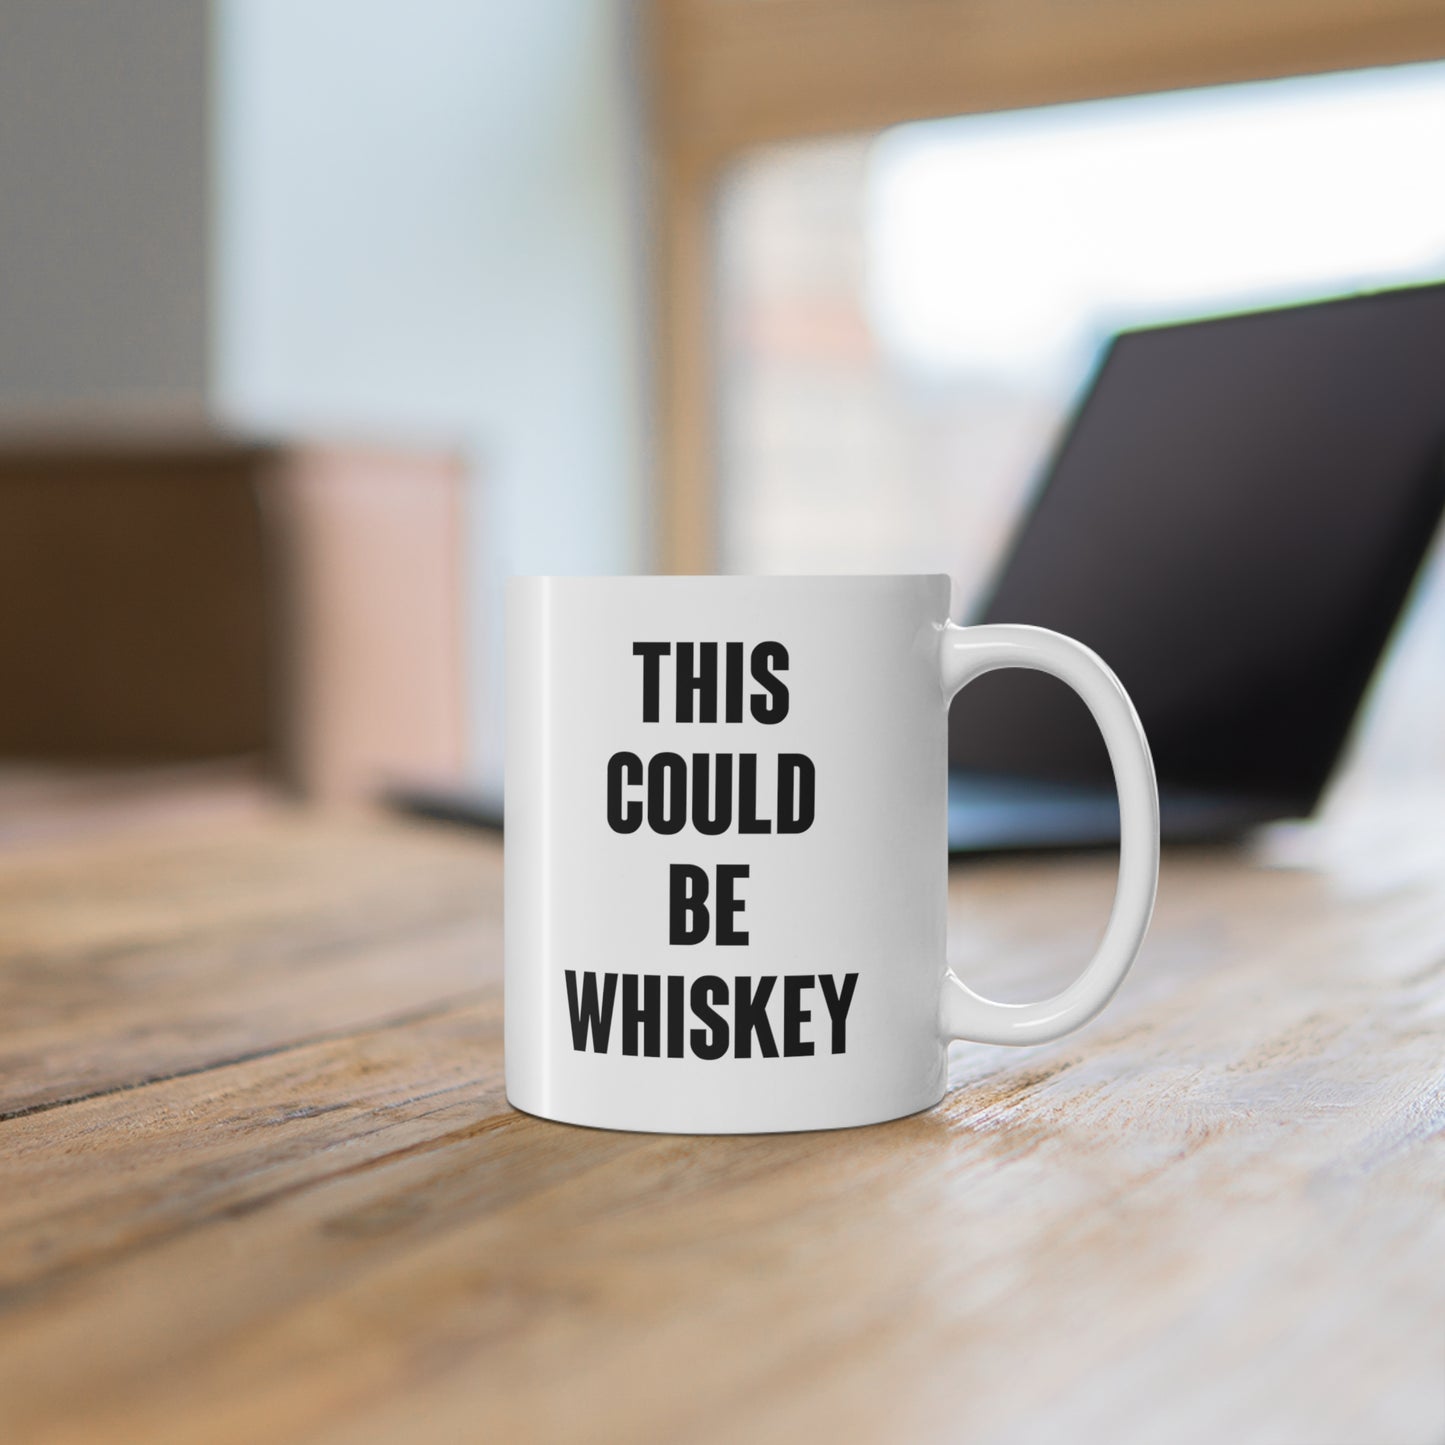 11oz ceramic mug with quote This Could Be Whiskey